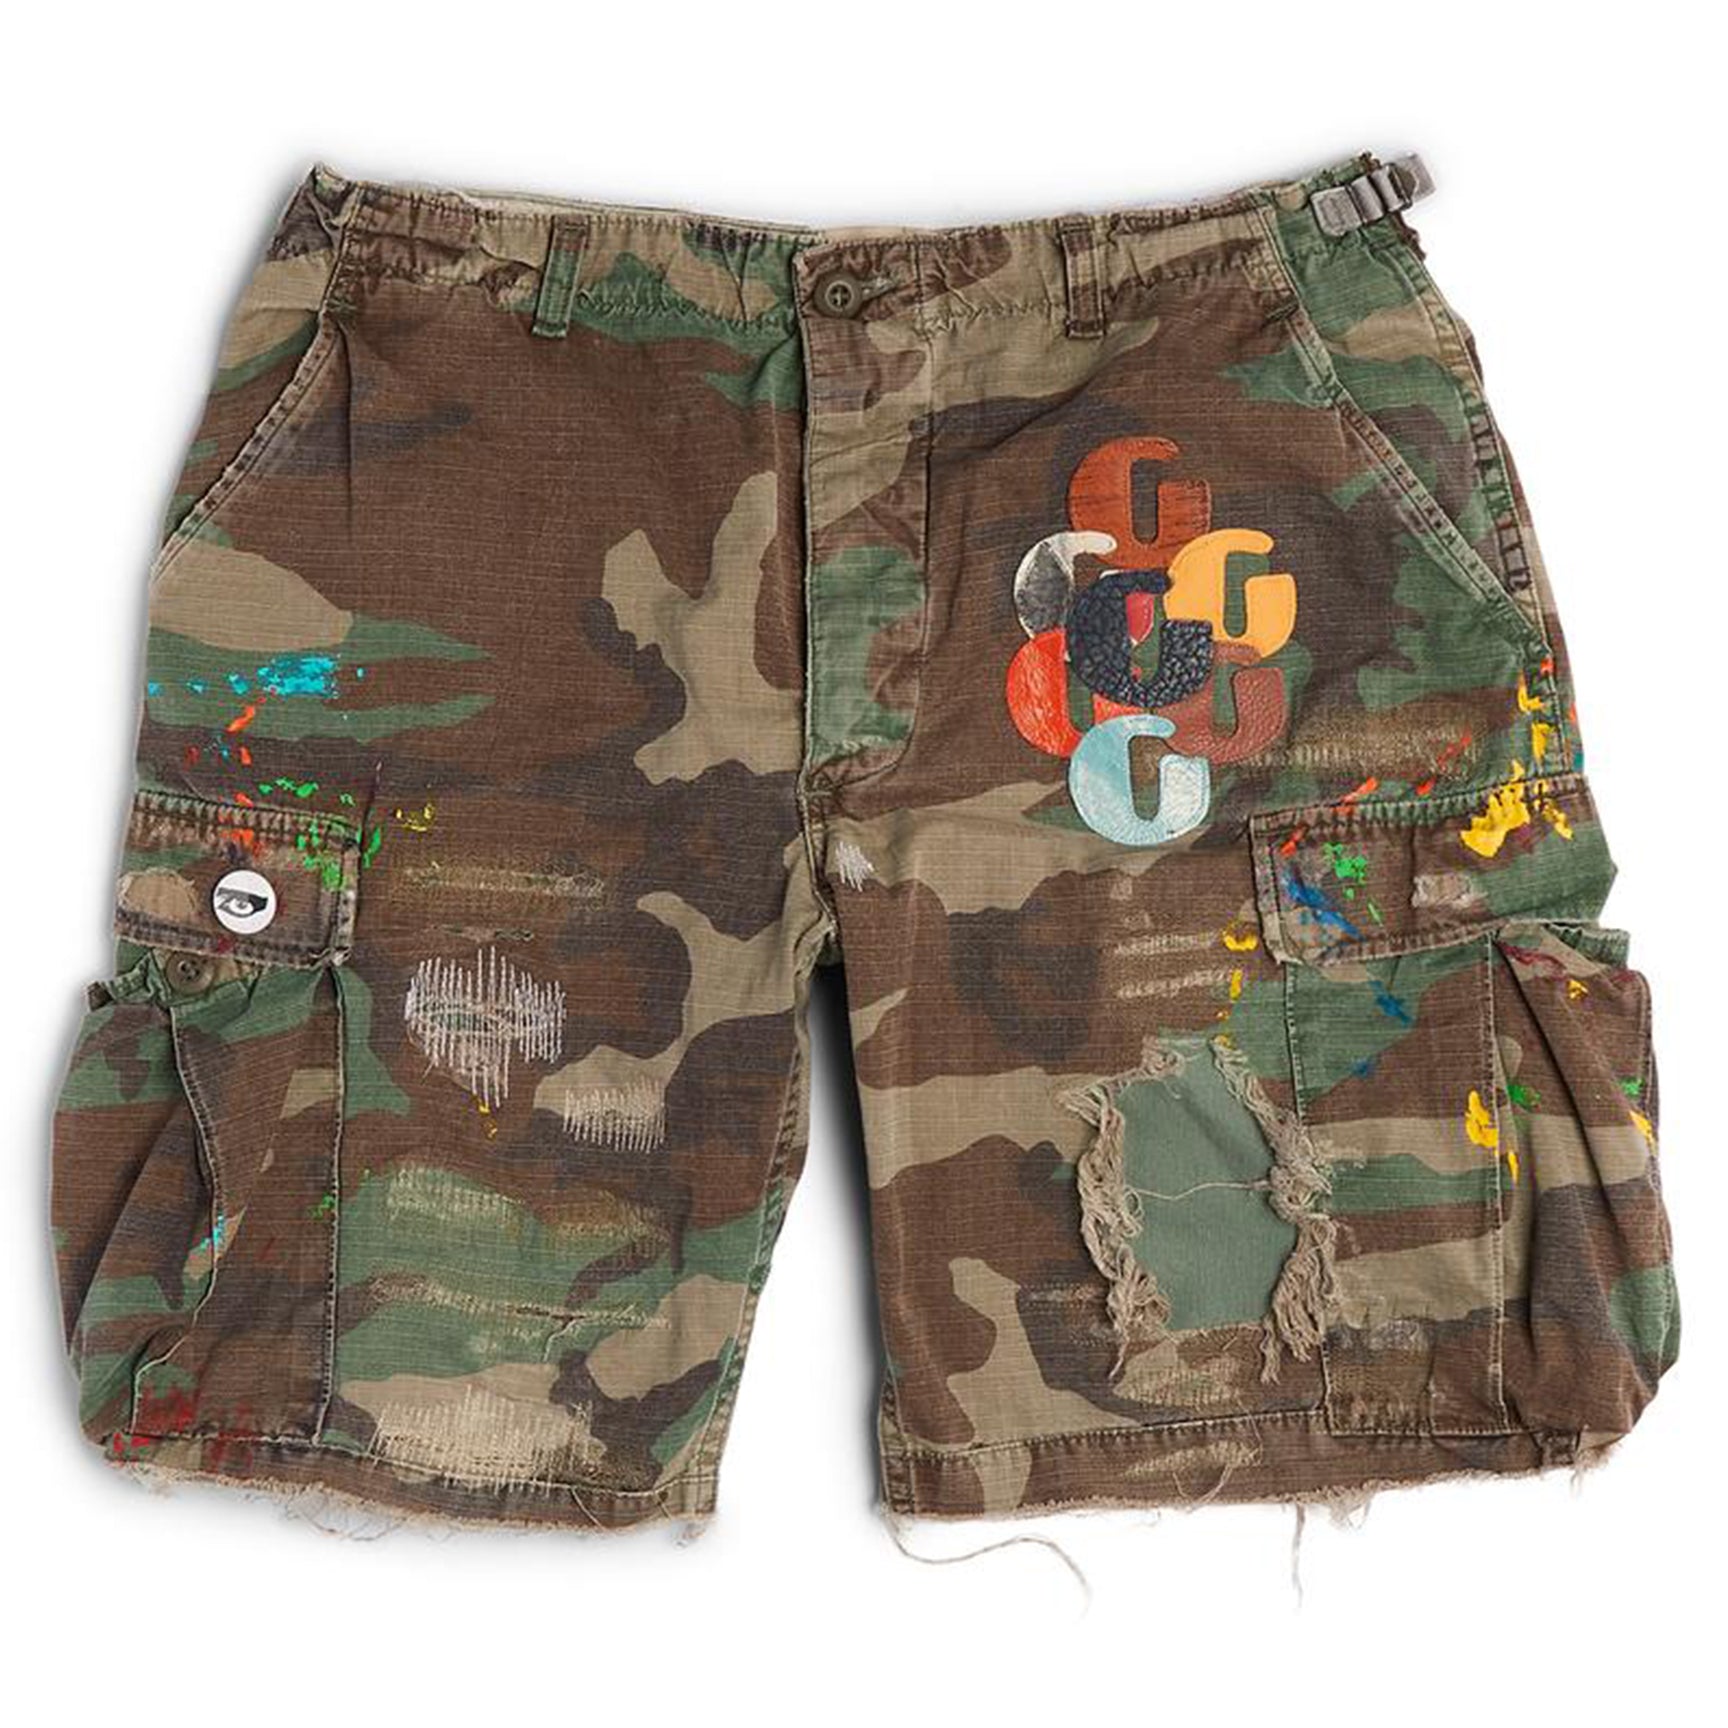 G PATCH WOODLAND CAMO CARGO SHORTS – Gallery Dept - online